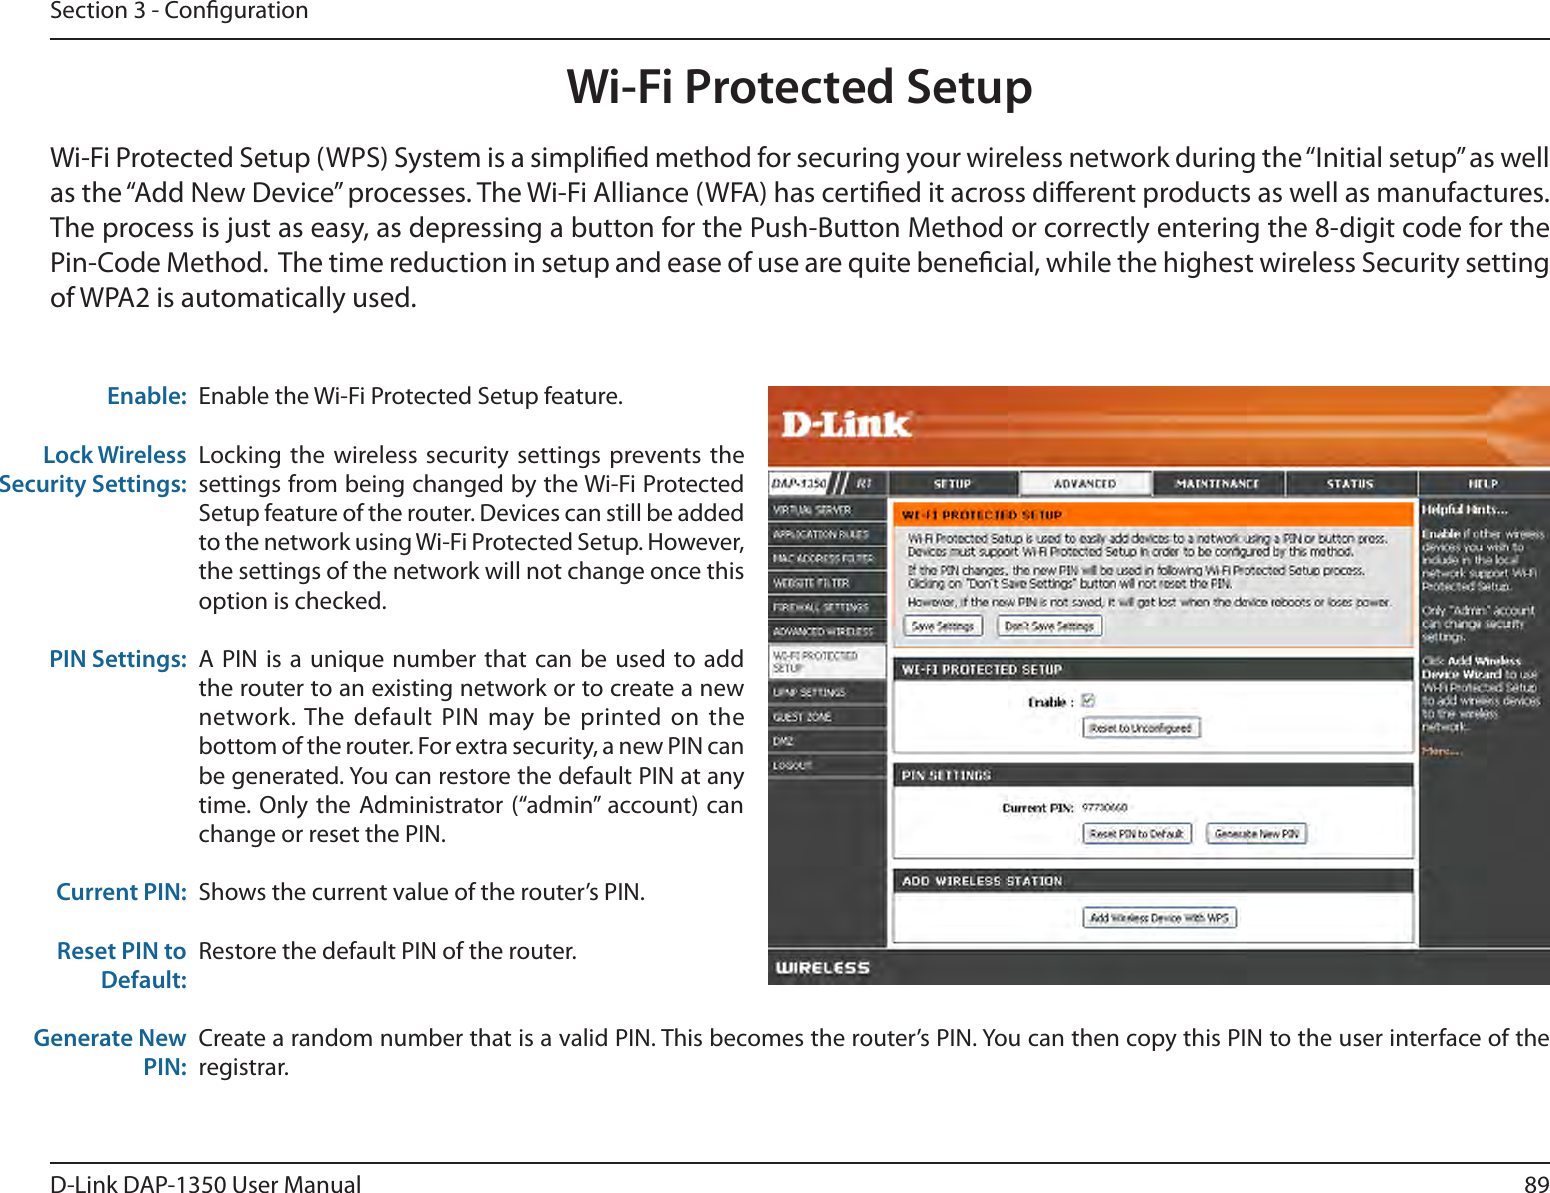 89D-Link DAP-1350 User ManualSection 3 - CongurationEnable the Wi-Fi Protected Setup feature. Locking the  wireless security  settings prevents the settings from being changed by the Wi-Fi Protected Setup feature of the router. Devices can still be added to the network using Wi-Fi Protected Setup. However, the settings of the network will not change once this option is checked.A PIN  is a  unique number  that can  be used  to add the router to an existing network or to create a new network. The default  PIN may be  printed on  the bottom of the router. For extra security, a new PIN can be generated. You can restore the default PIN at any time. Only the  Administrator (“admin”  account) can change or reset the PIN. Shows the current value of the router’s PIN. Restore the default PIN of the router. Create a random number that is a valid PIN. This becomes the router’s PIN. You can then copy this PIN to the user interface of the registrar.Enable:Lock Wireless Security Settings:PIN Settings:Current PIN:Reset PIN to Default:Generate New PIN:Wi-Fi Protected SetupWi-Fi Protected Setup (WPS) System is a simplied method for securing your wireless network during the “Initial setup” as well as the “Add New Device” processes. The Wi-Fi Alliance (WFA) has certied it across dierent products as well as manufactures. The process is just as easy, as depressing a button for the Push-Button Method or correctly entering the 8-digit code for the Pin-Code Method.  The time reduction in setup and ease of use are quite benecial, while the highest wireless Security setting of WPA2 is automatically used.